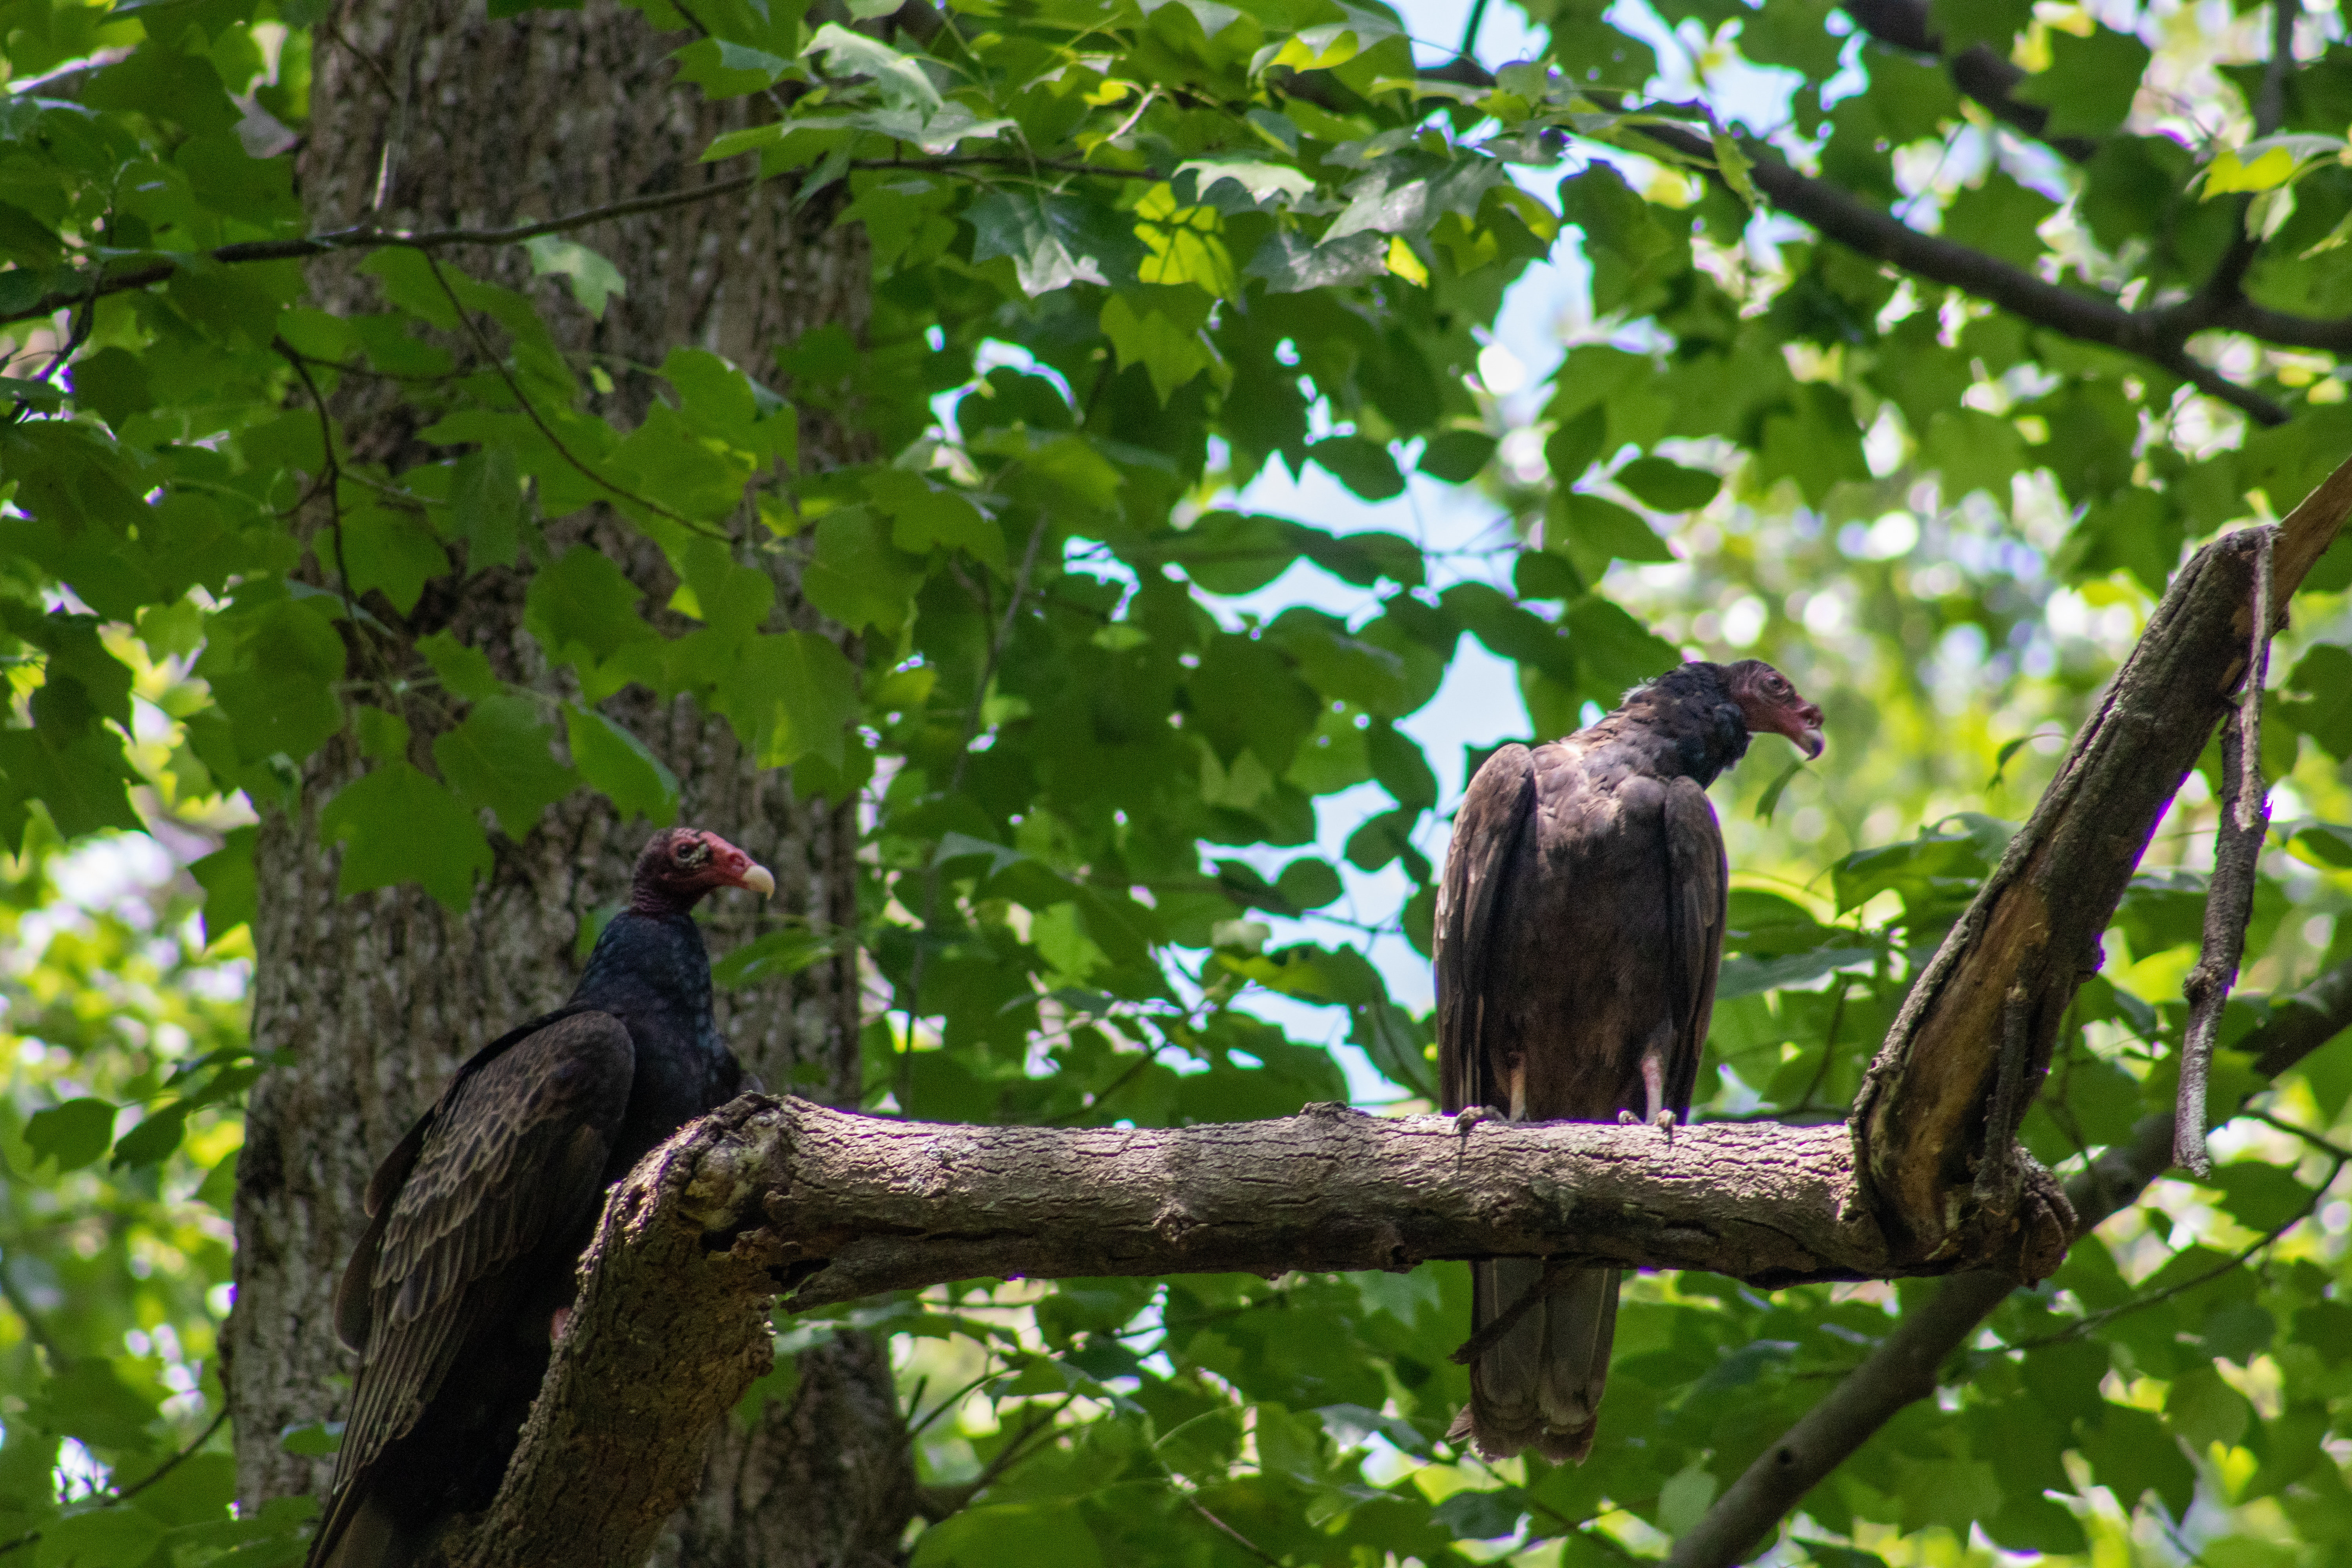 Two vultures on a branch